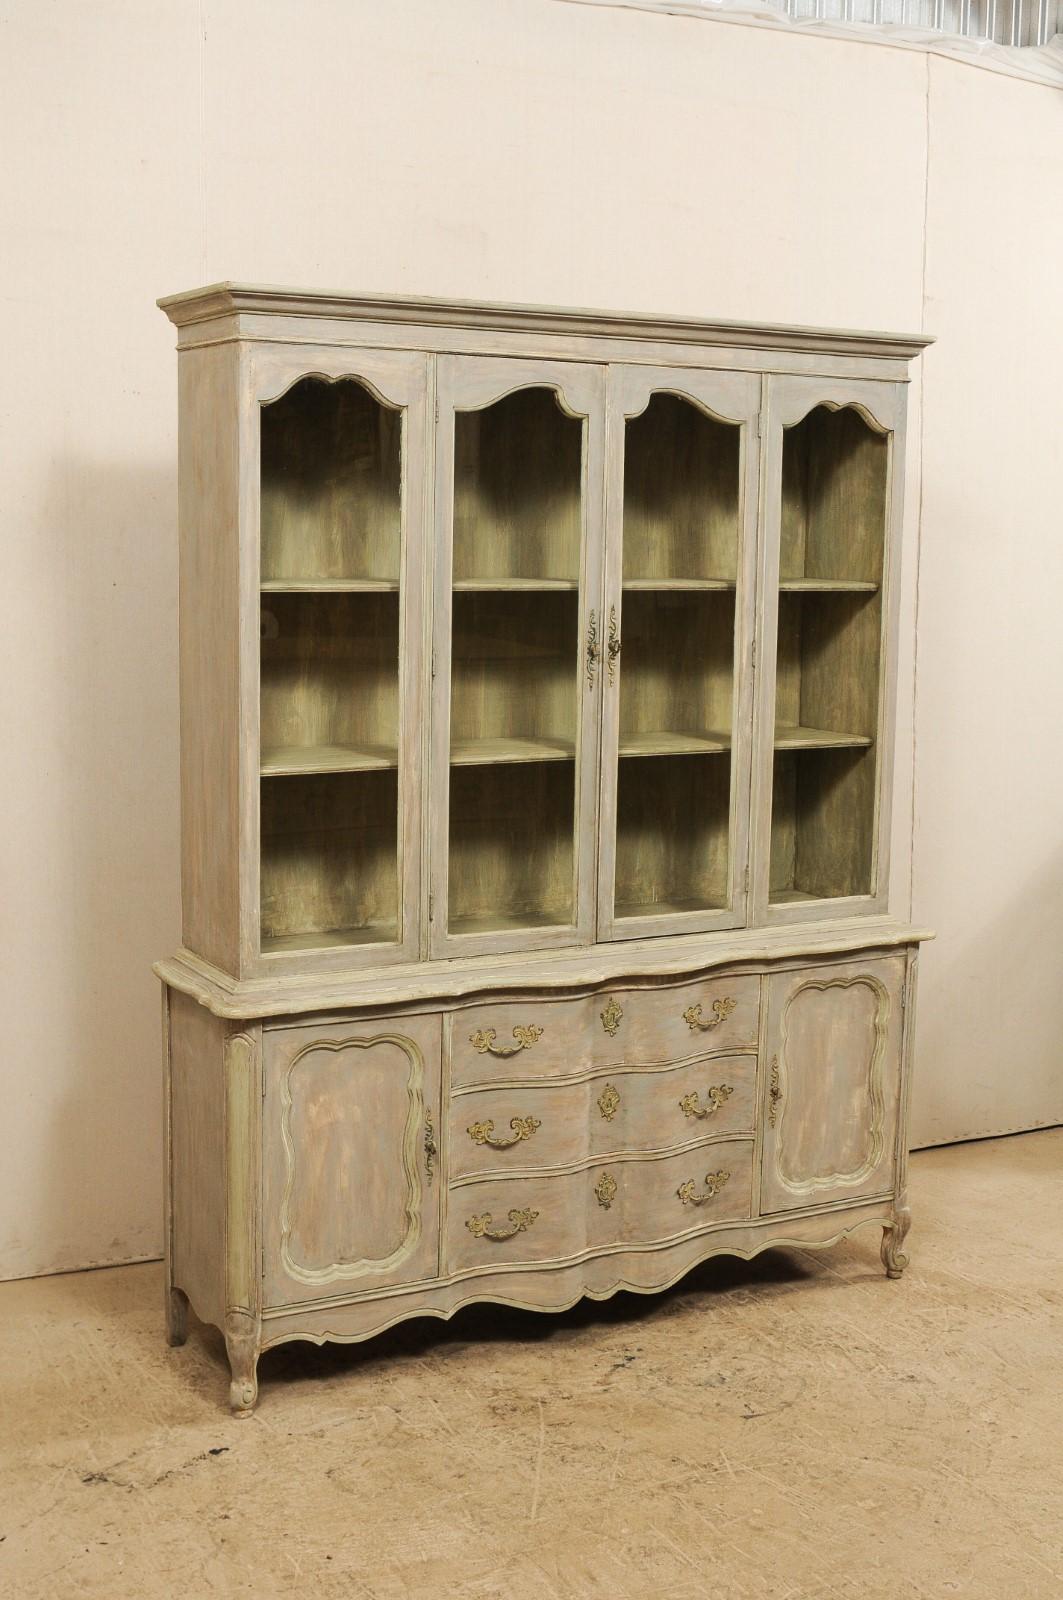 French Style Mid-20th Century Wood and Glass Display and Storage Cabinet (Geschnitzt)